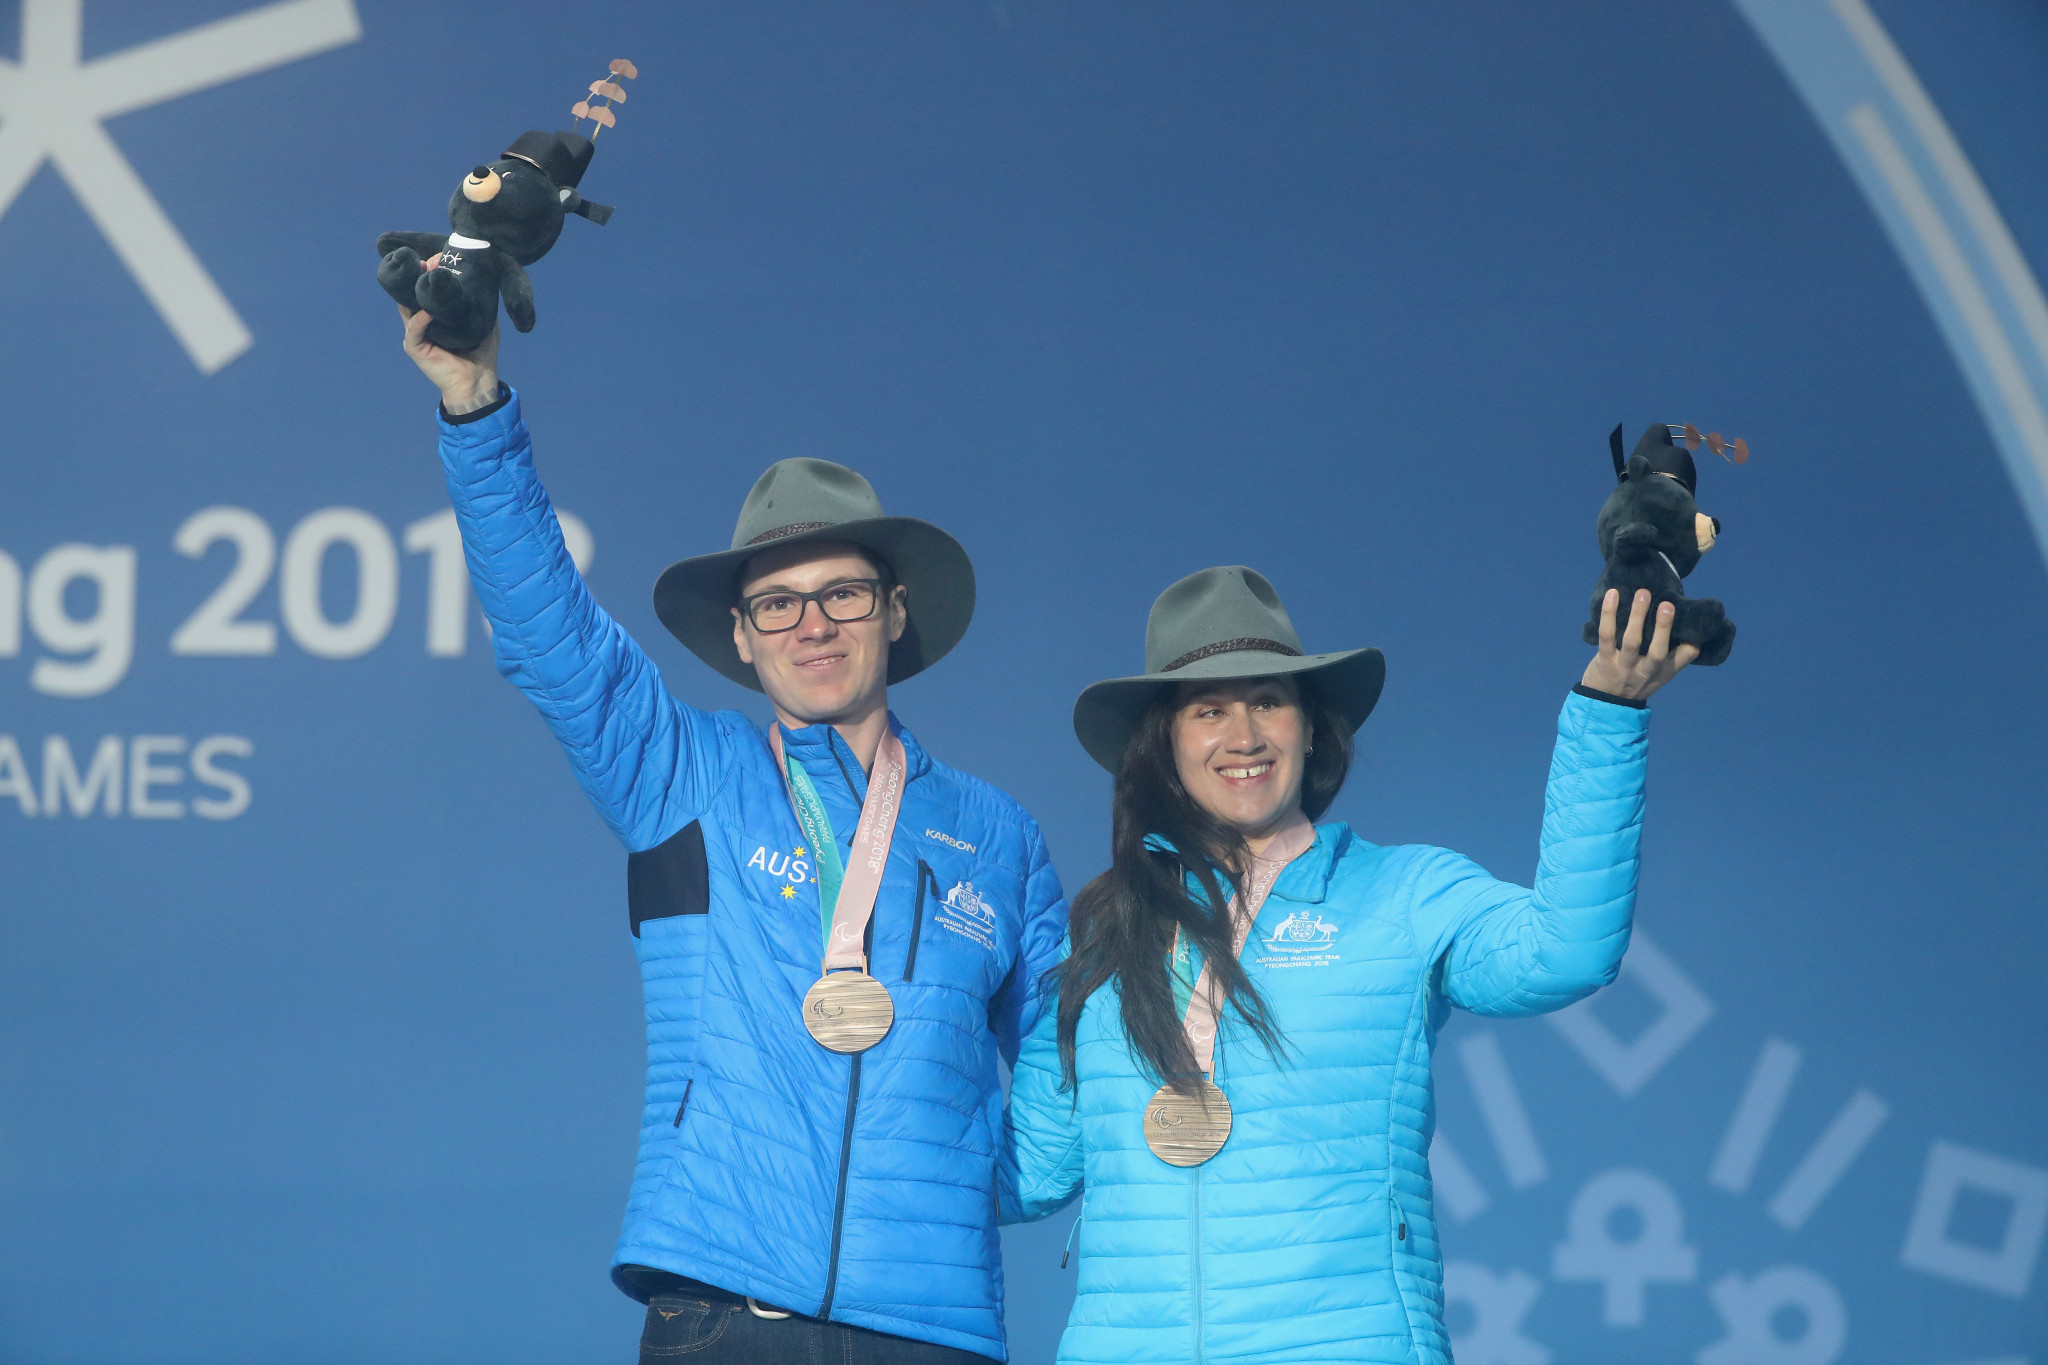 Melissa Perrine, right, won two bronze medals with guide Christian Geiger at Pyeongchang 2018 ©Getty Images